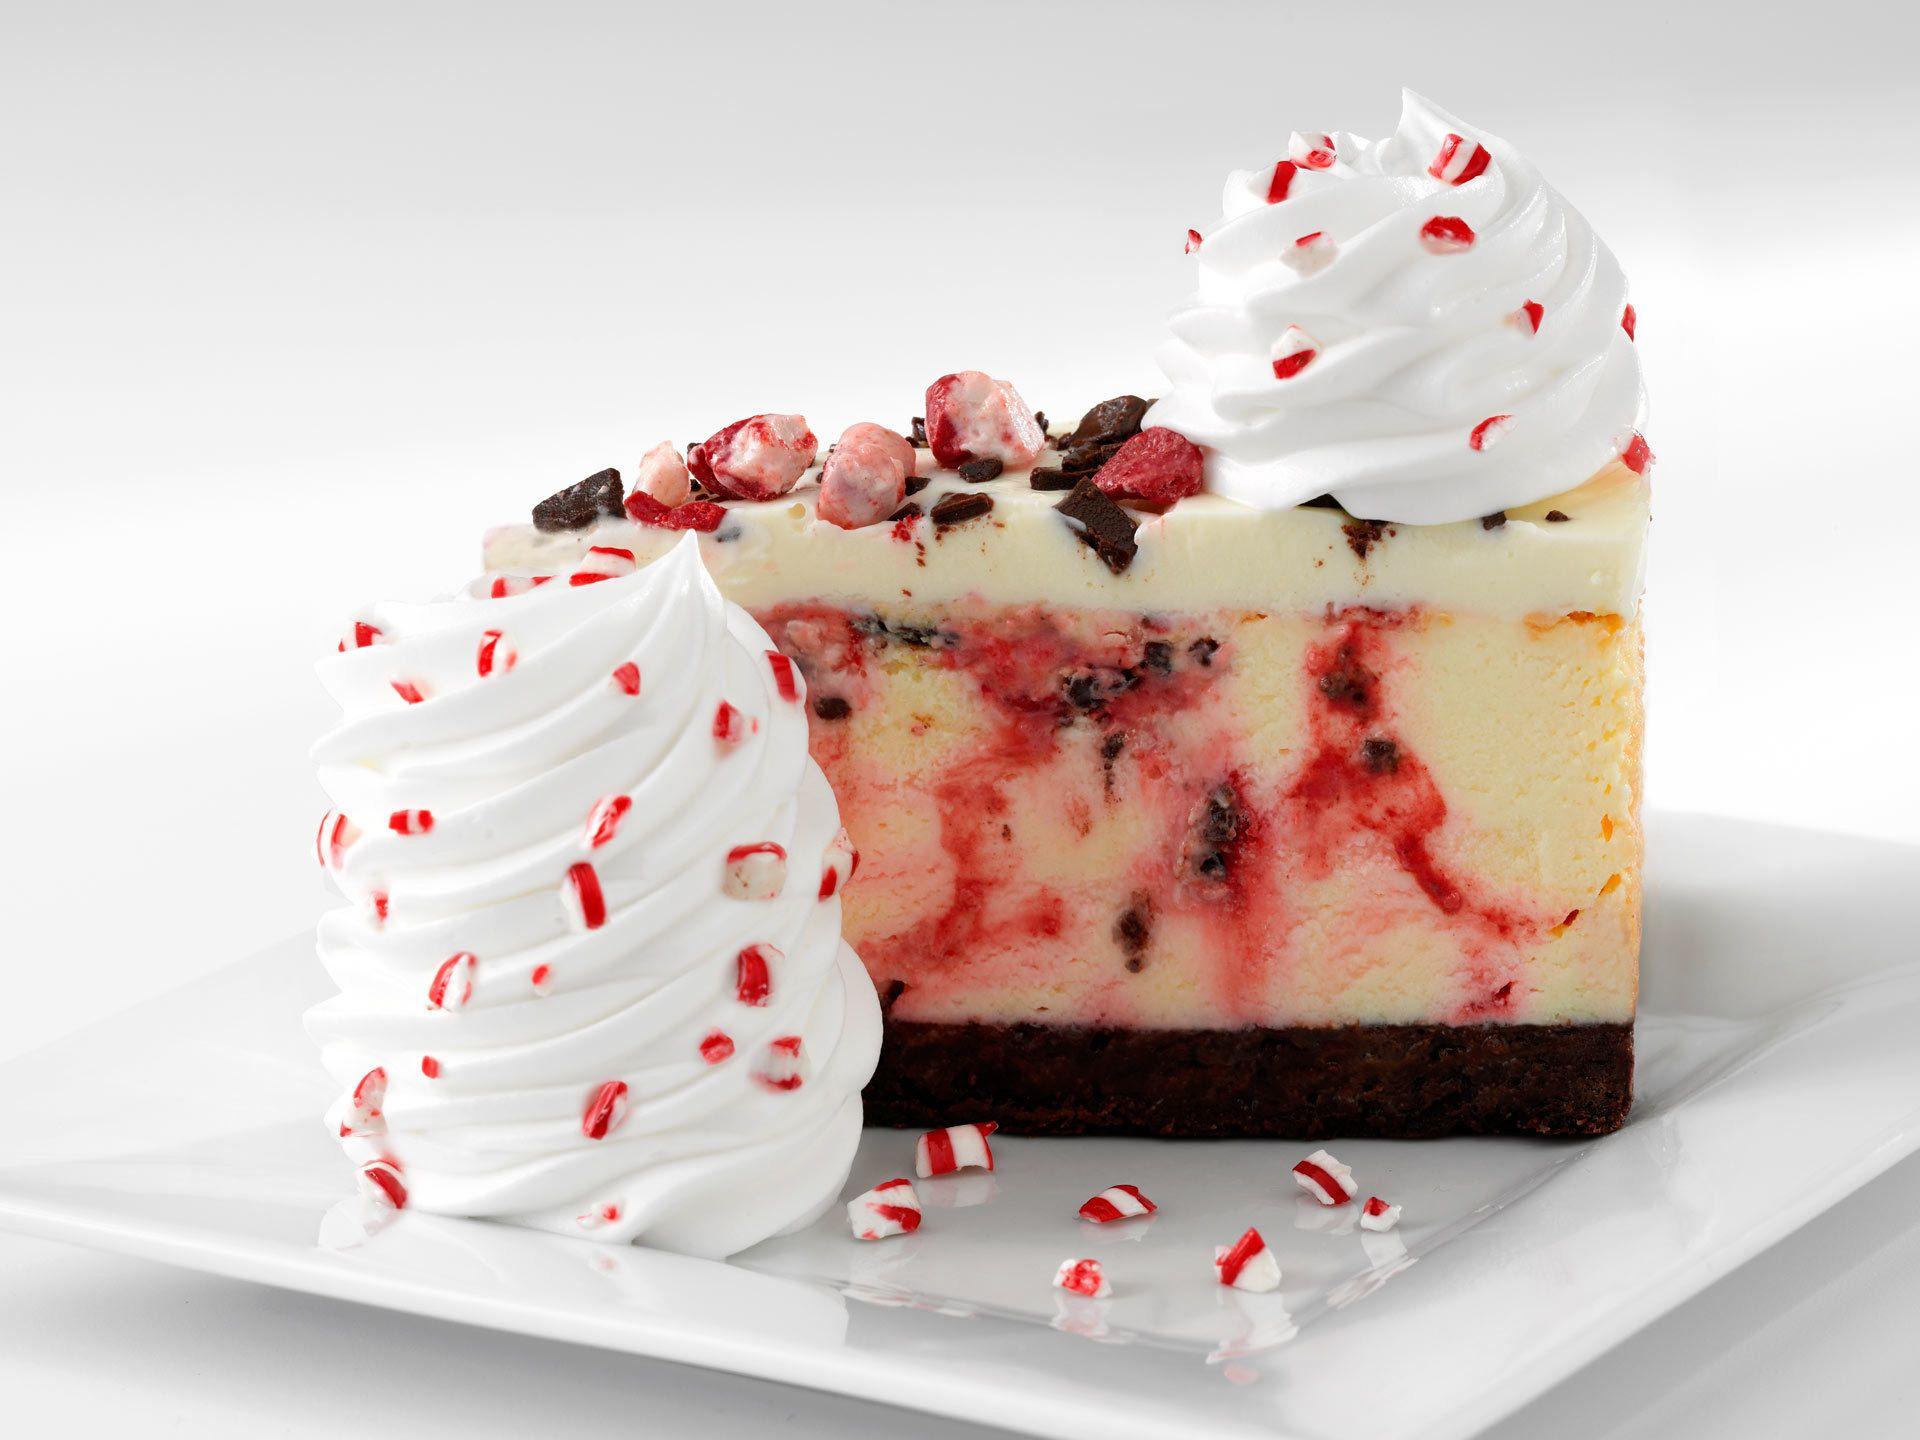 Two free slices of cheesecake with gift card purchase